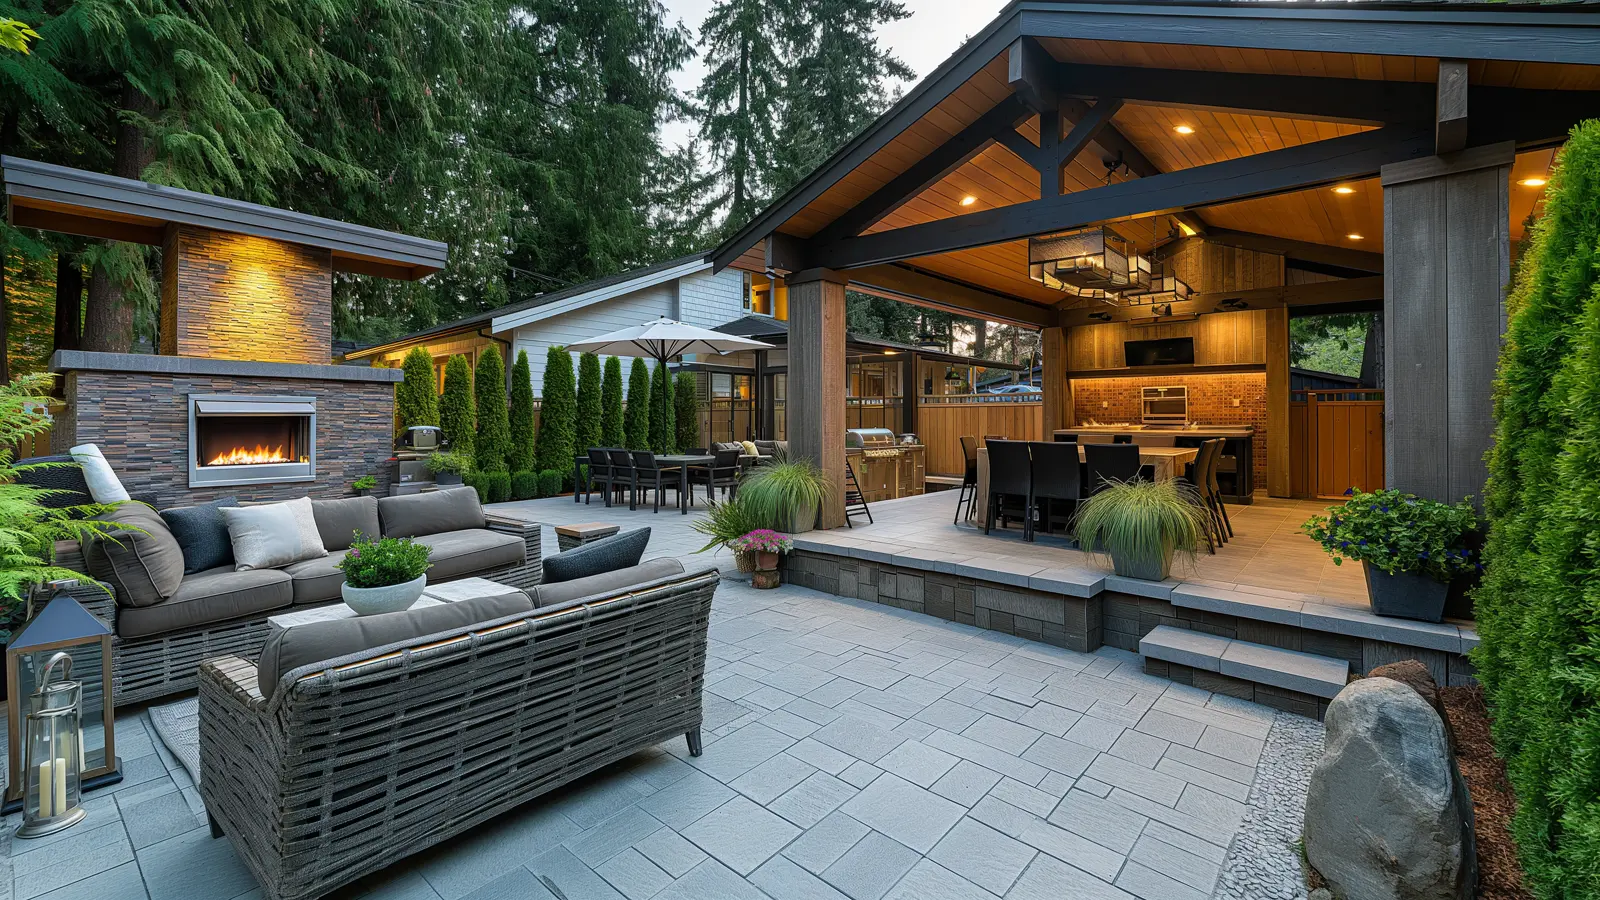 Inspiration for Functional and Beautiful Outdoor Spaces Ideas